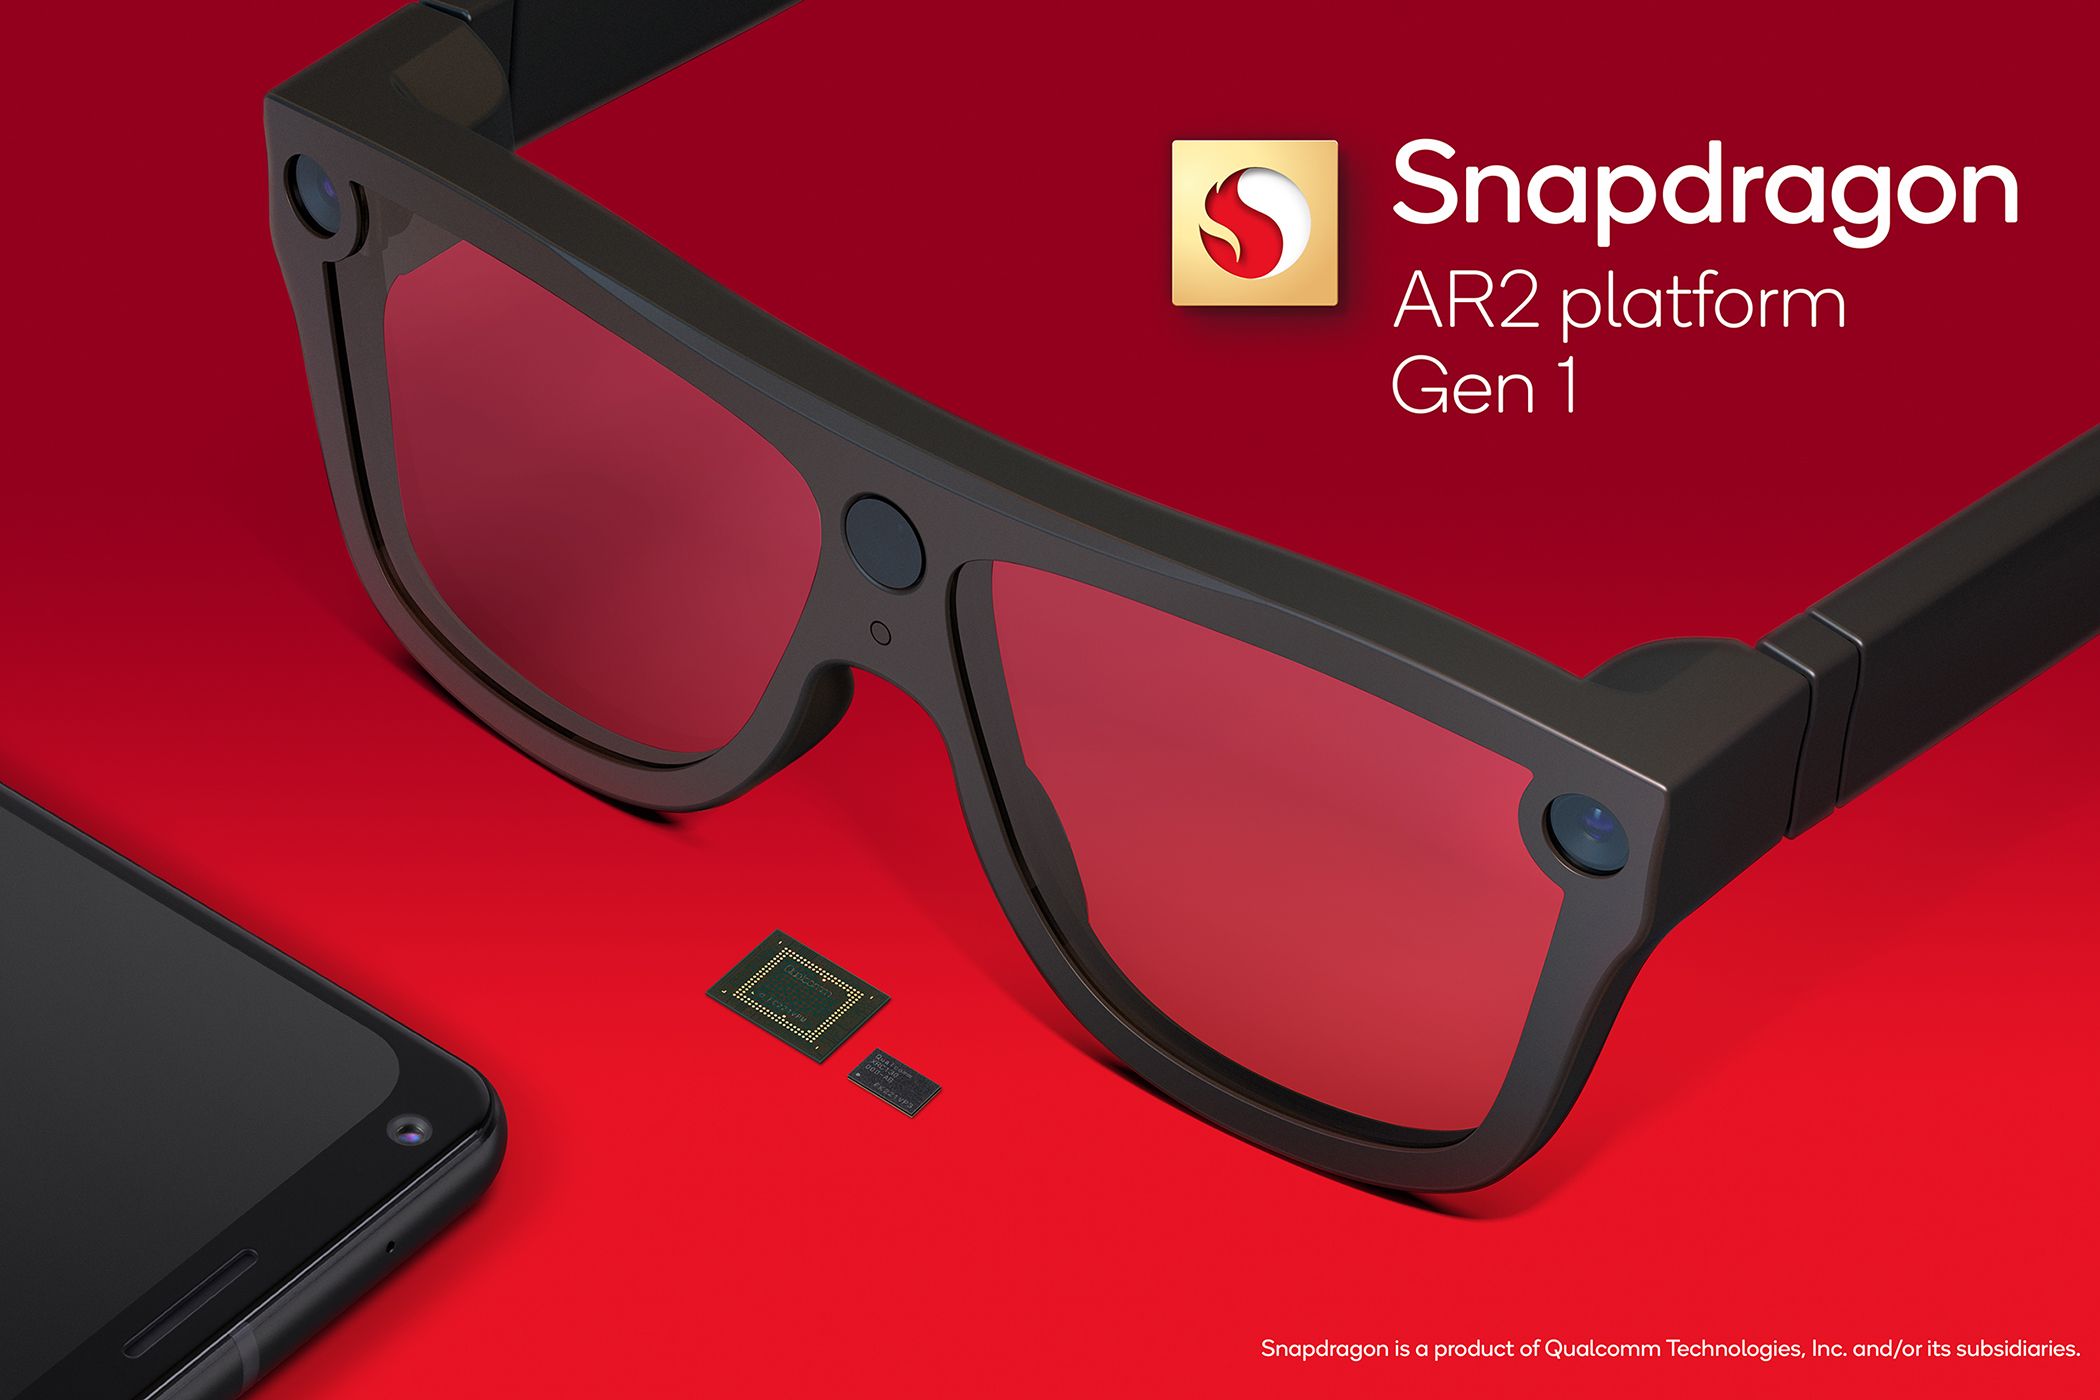 Qualcomm Snapdragon AR2 Gen 1 advertising poster with smart glass and smartphone on a red background.